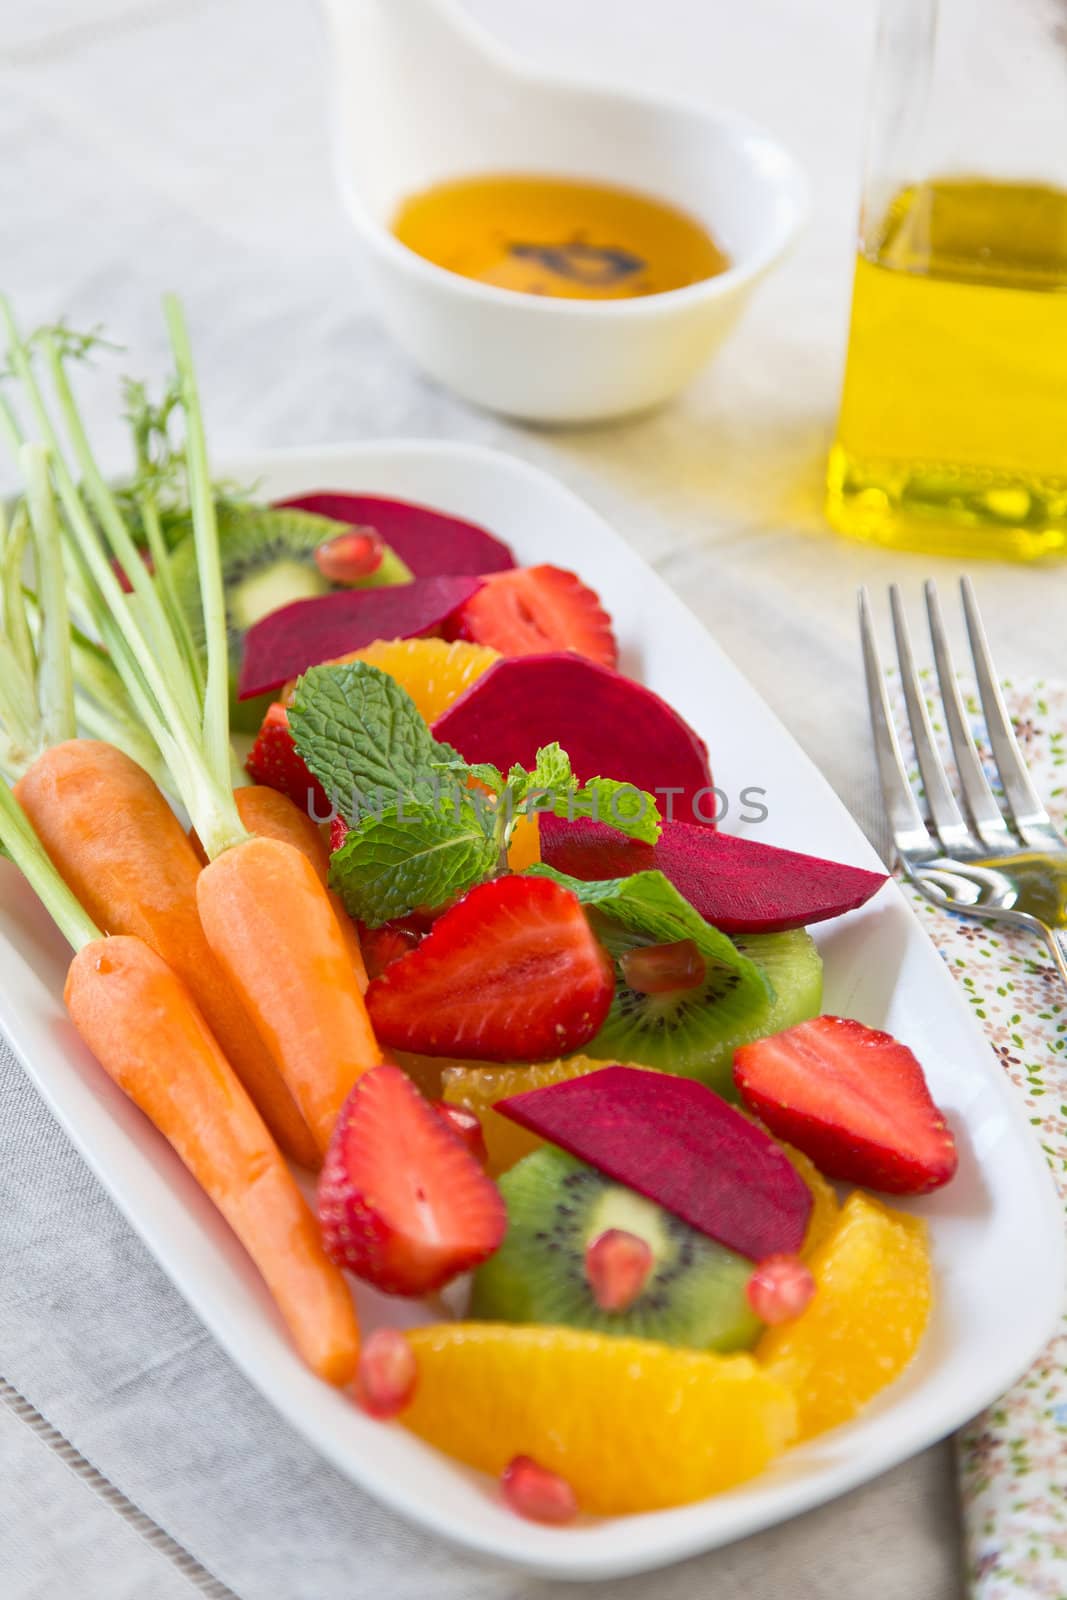 Fruits and vegetables salad by vanillaechoes